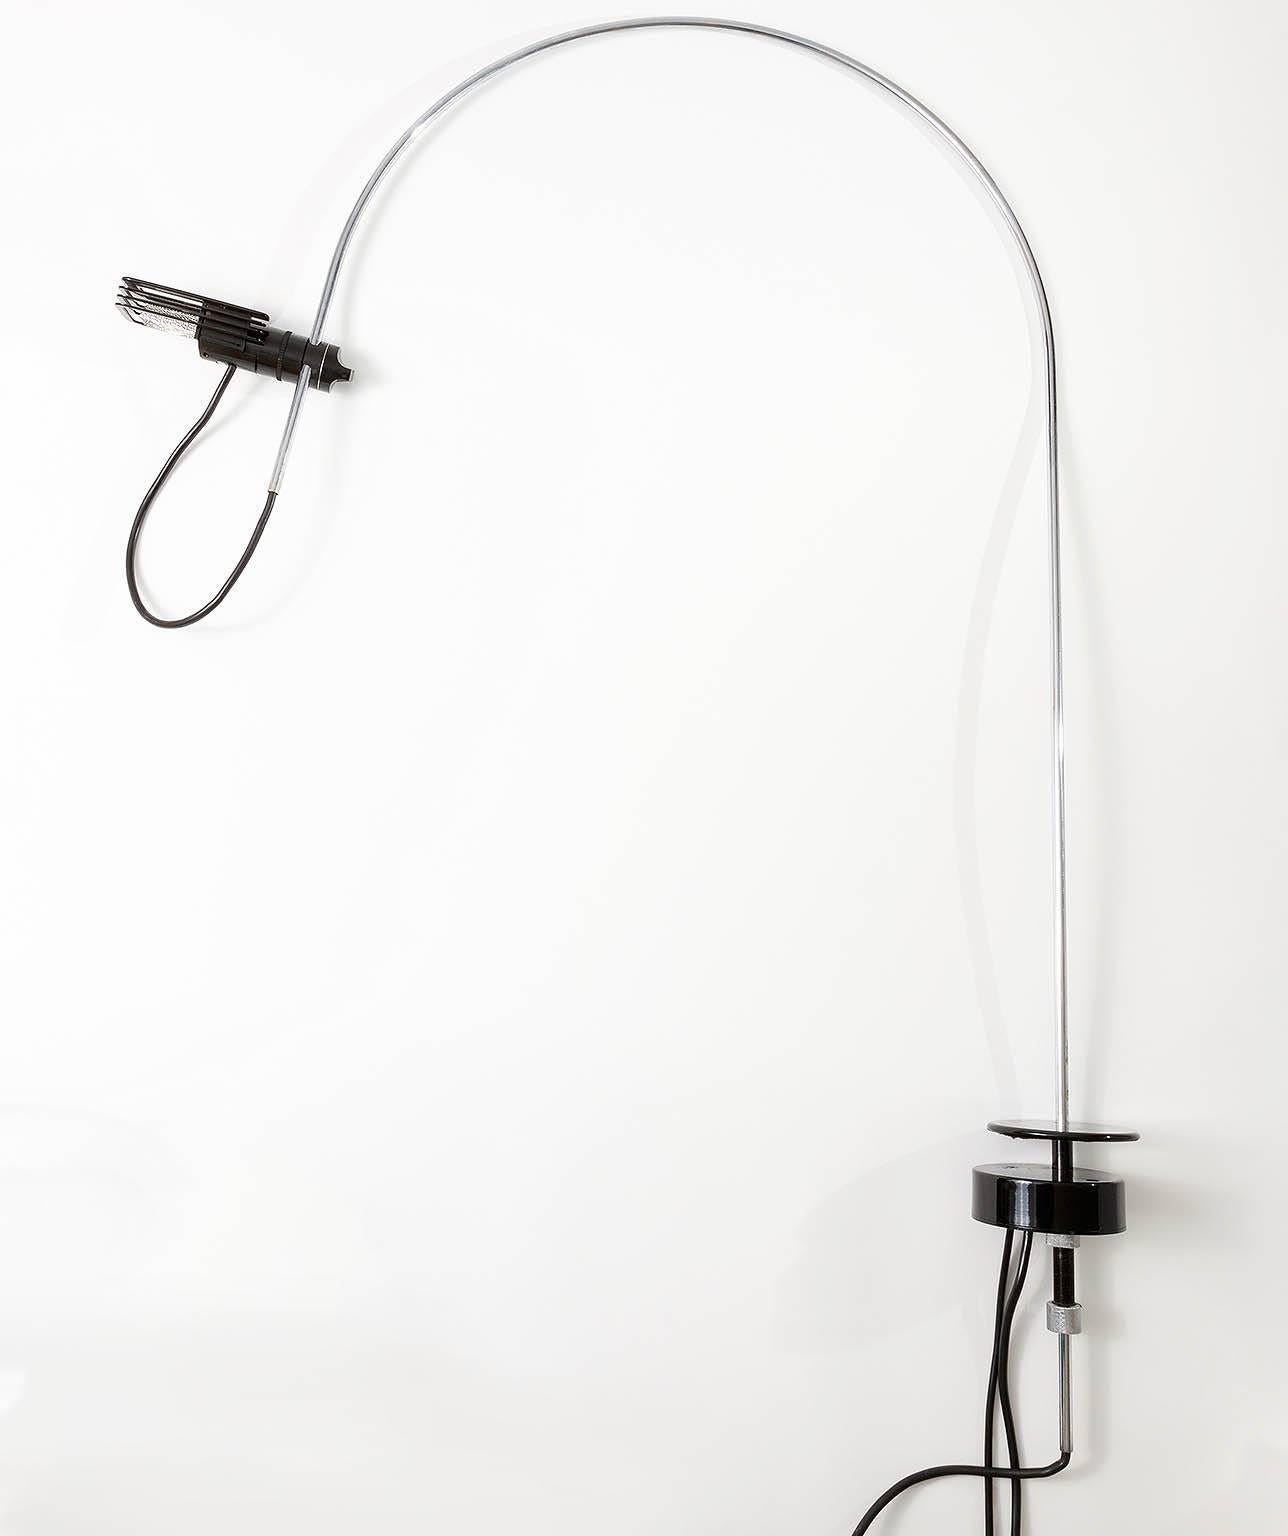 Rare wing table or desk lamp designed in 1973 by Bruno Gecchelin for Italian maker Oluce, Milan. Chrome-plated tubular steel, black plastic, base painted black. Halogen bulb. Wear on mounting device (please see images).